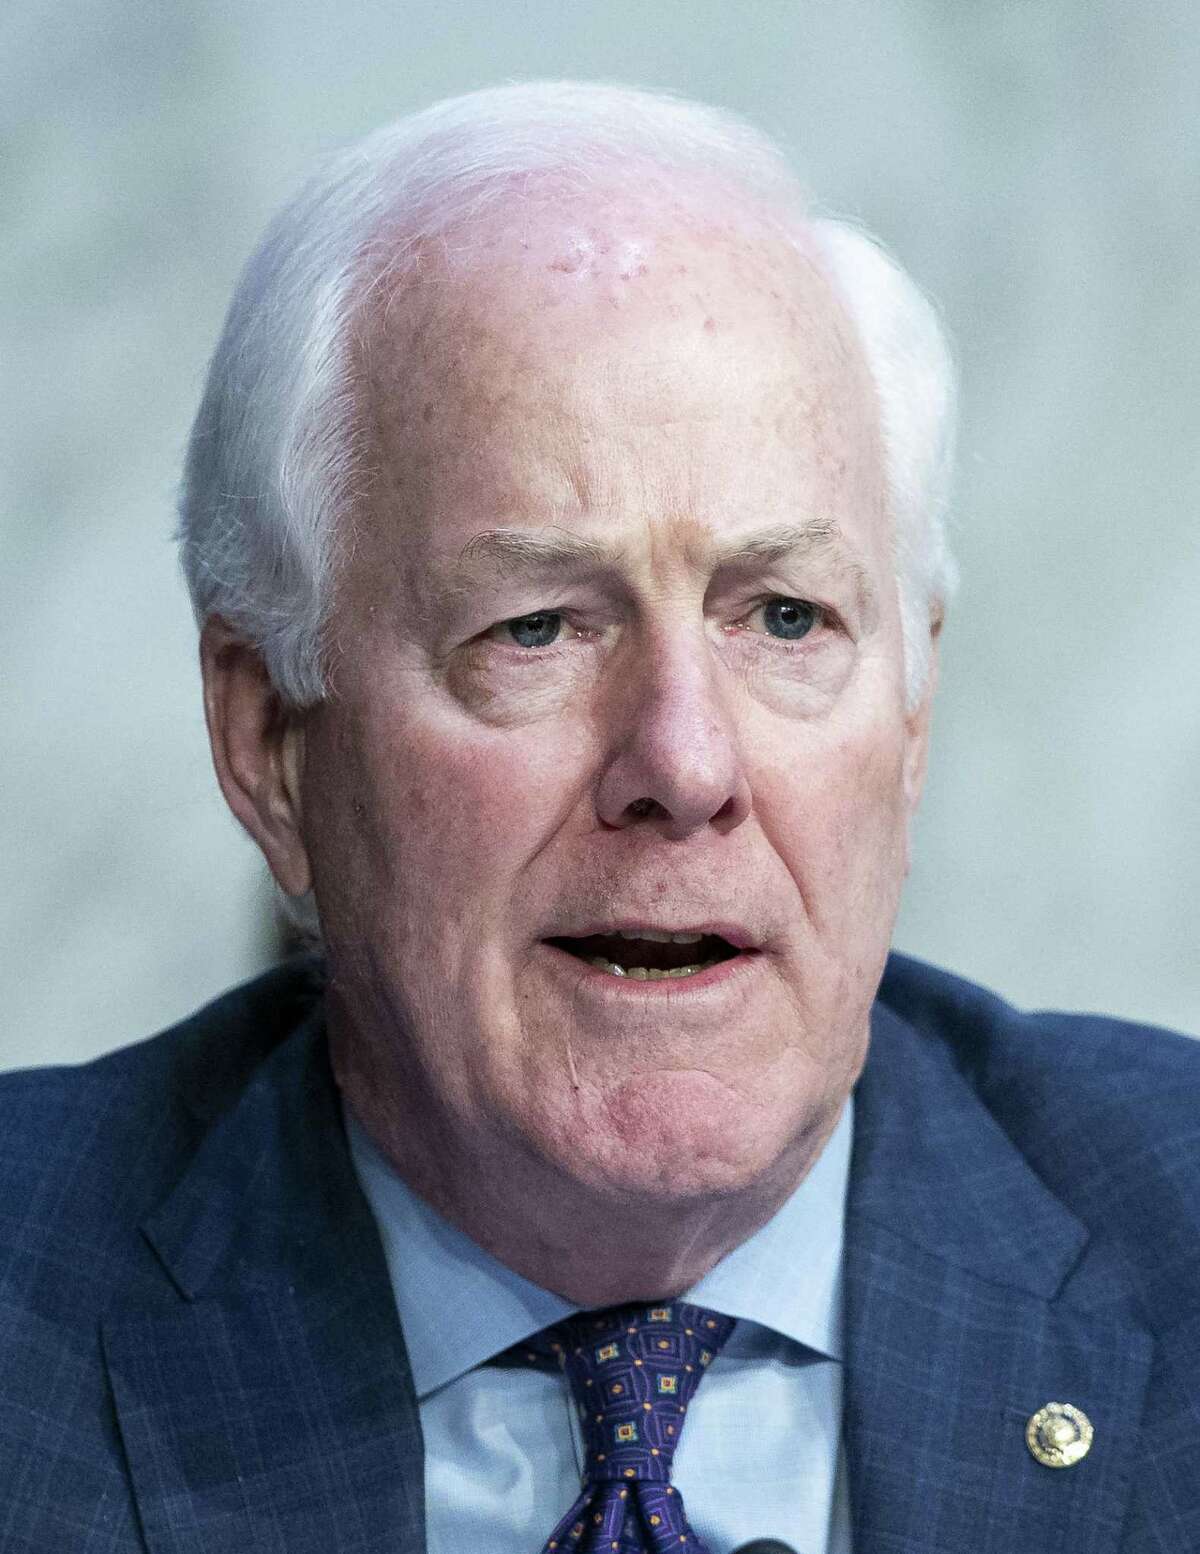 Several Texas Republicans, including Sen. John Cornyn, abstained from requesting earmarks in the budgeting process, citing concerns about ethics and wasteful spending.